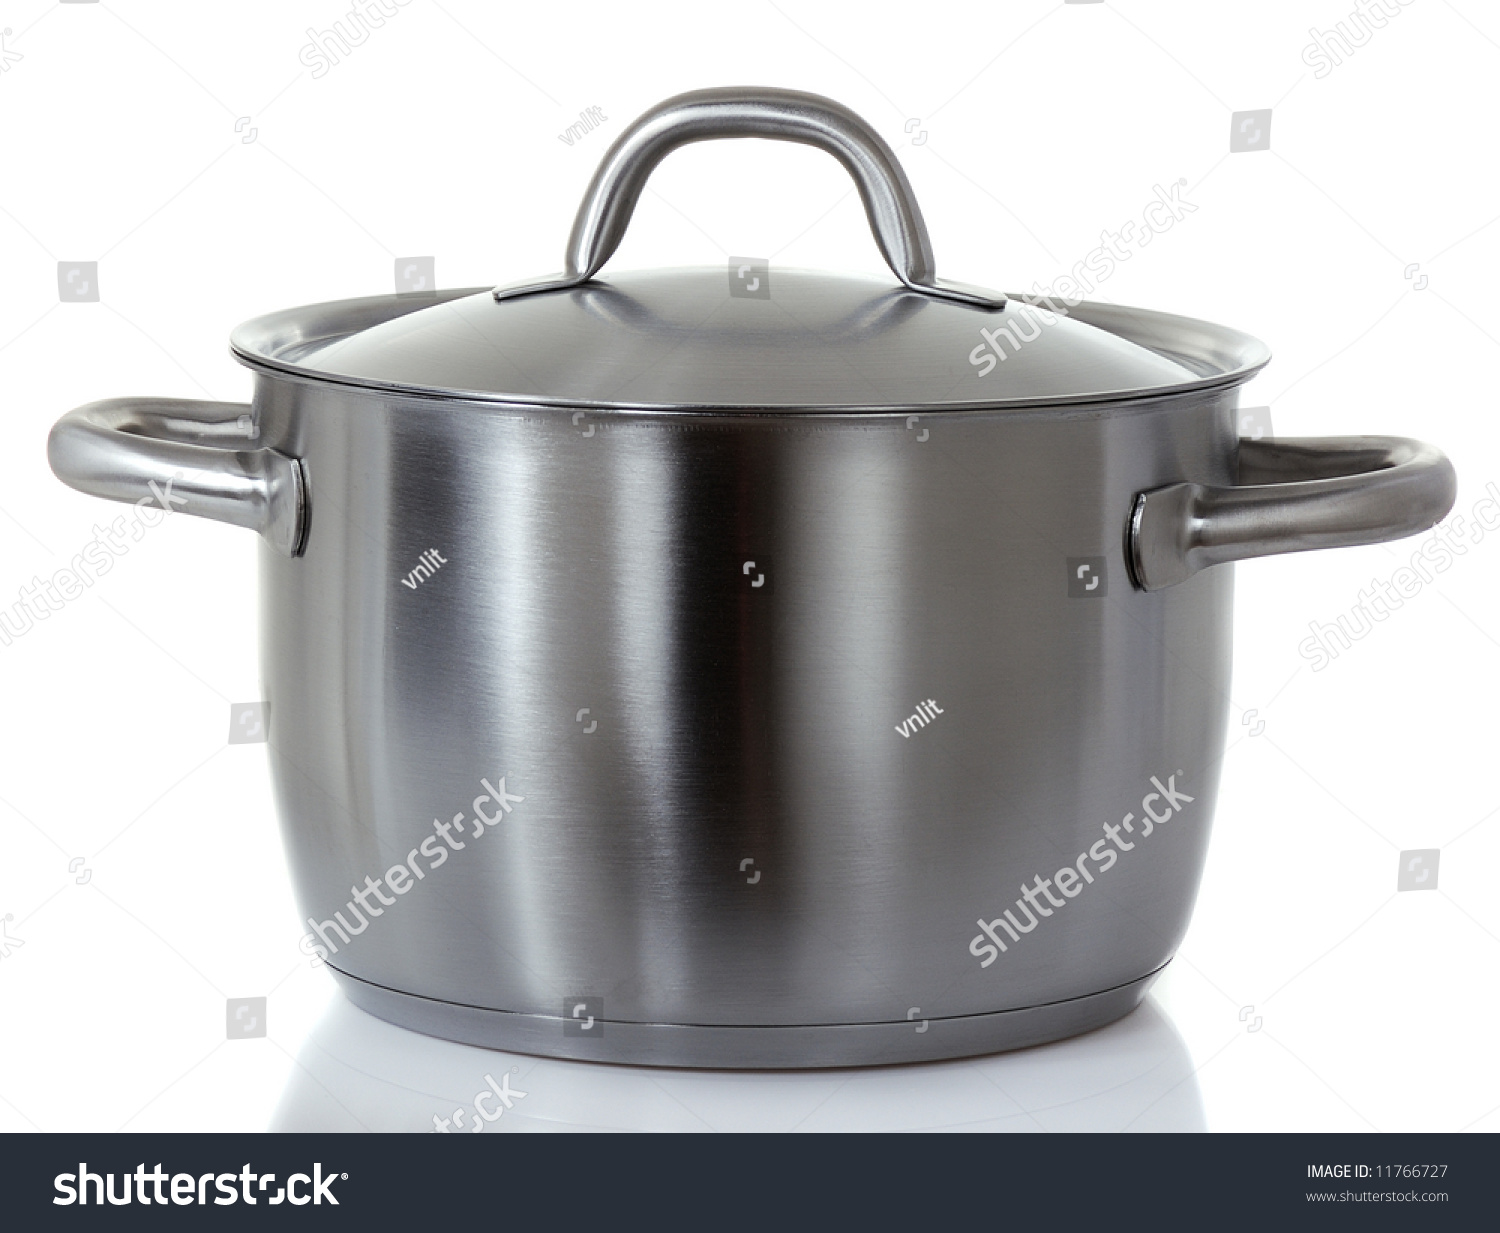 stainless pan isolated on white #11766727